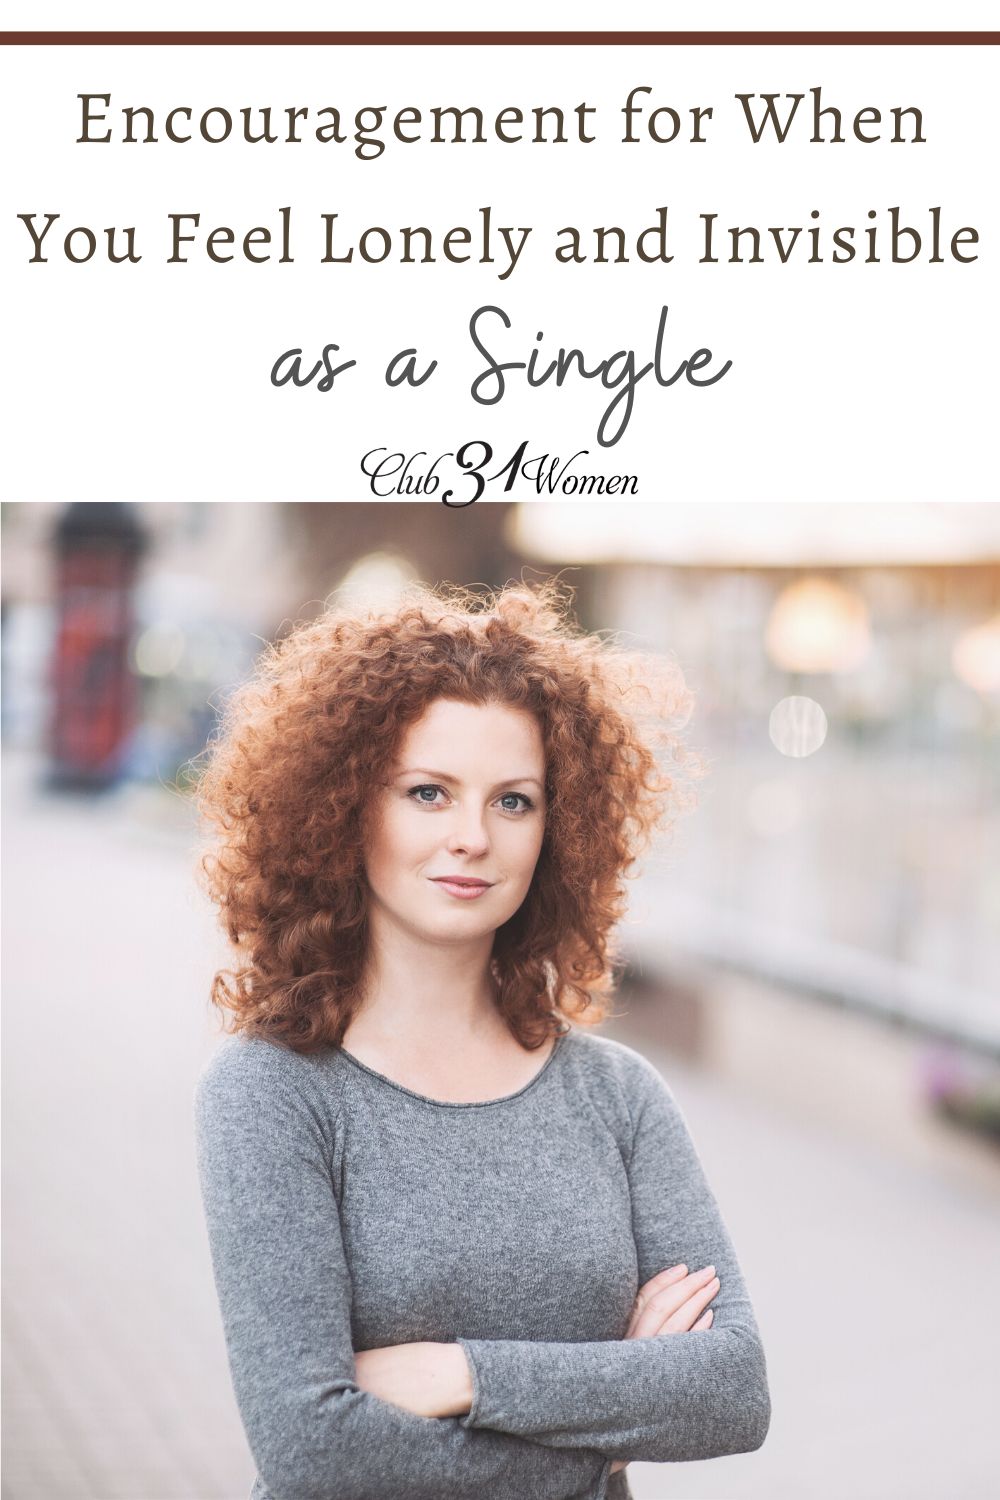 If you're in a season of being single, how can you stay well in that season? In what ways can you cling to God and trust His timing for your life? via @Club31Women